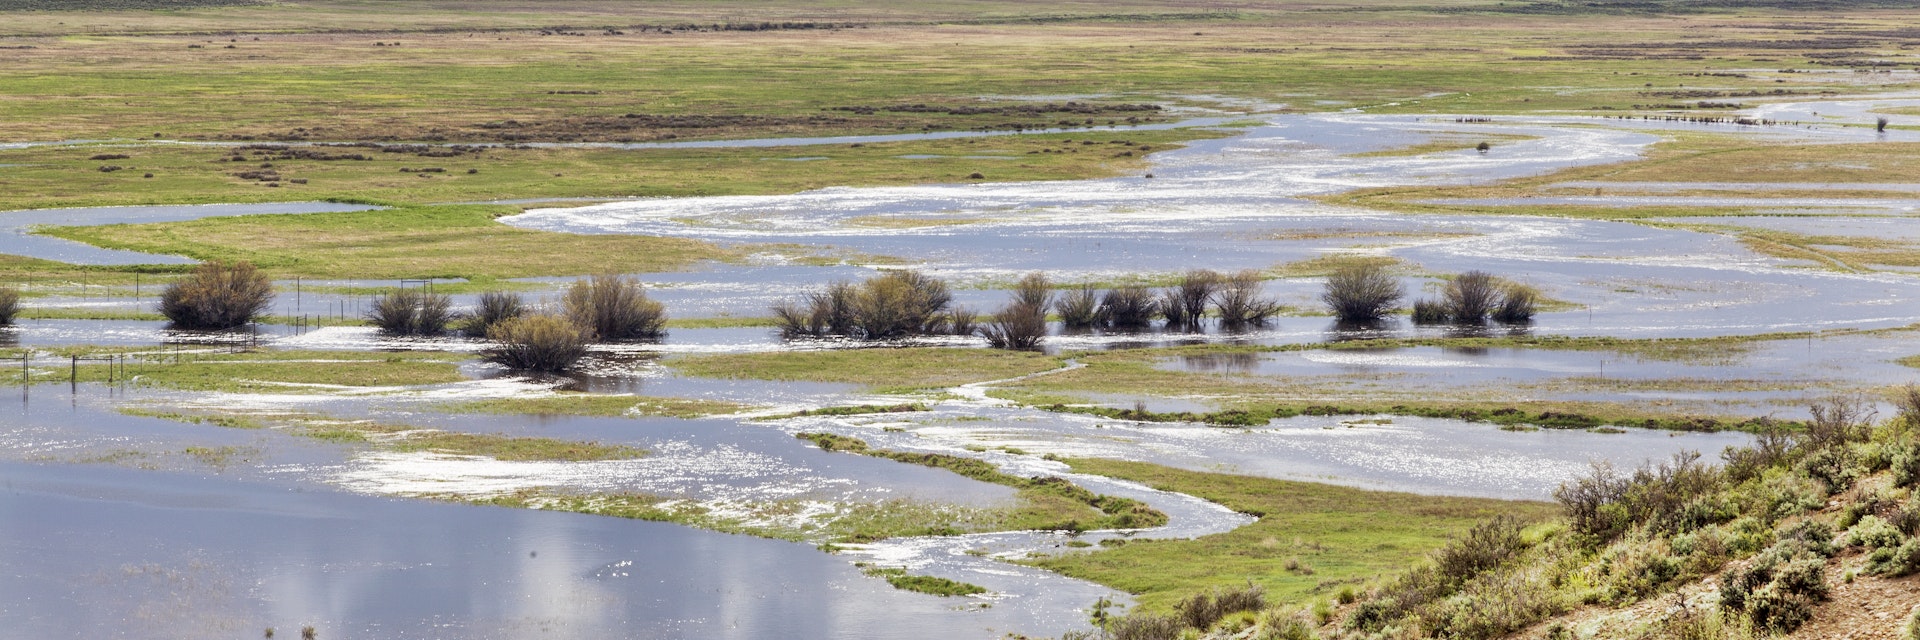 The Illinois River meanders through Arapaho National Wildlife Refuge.